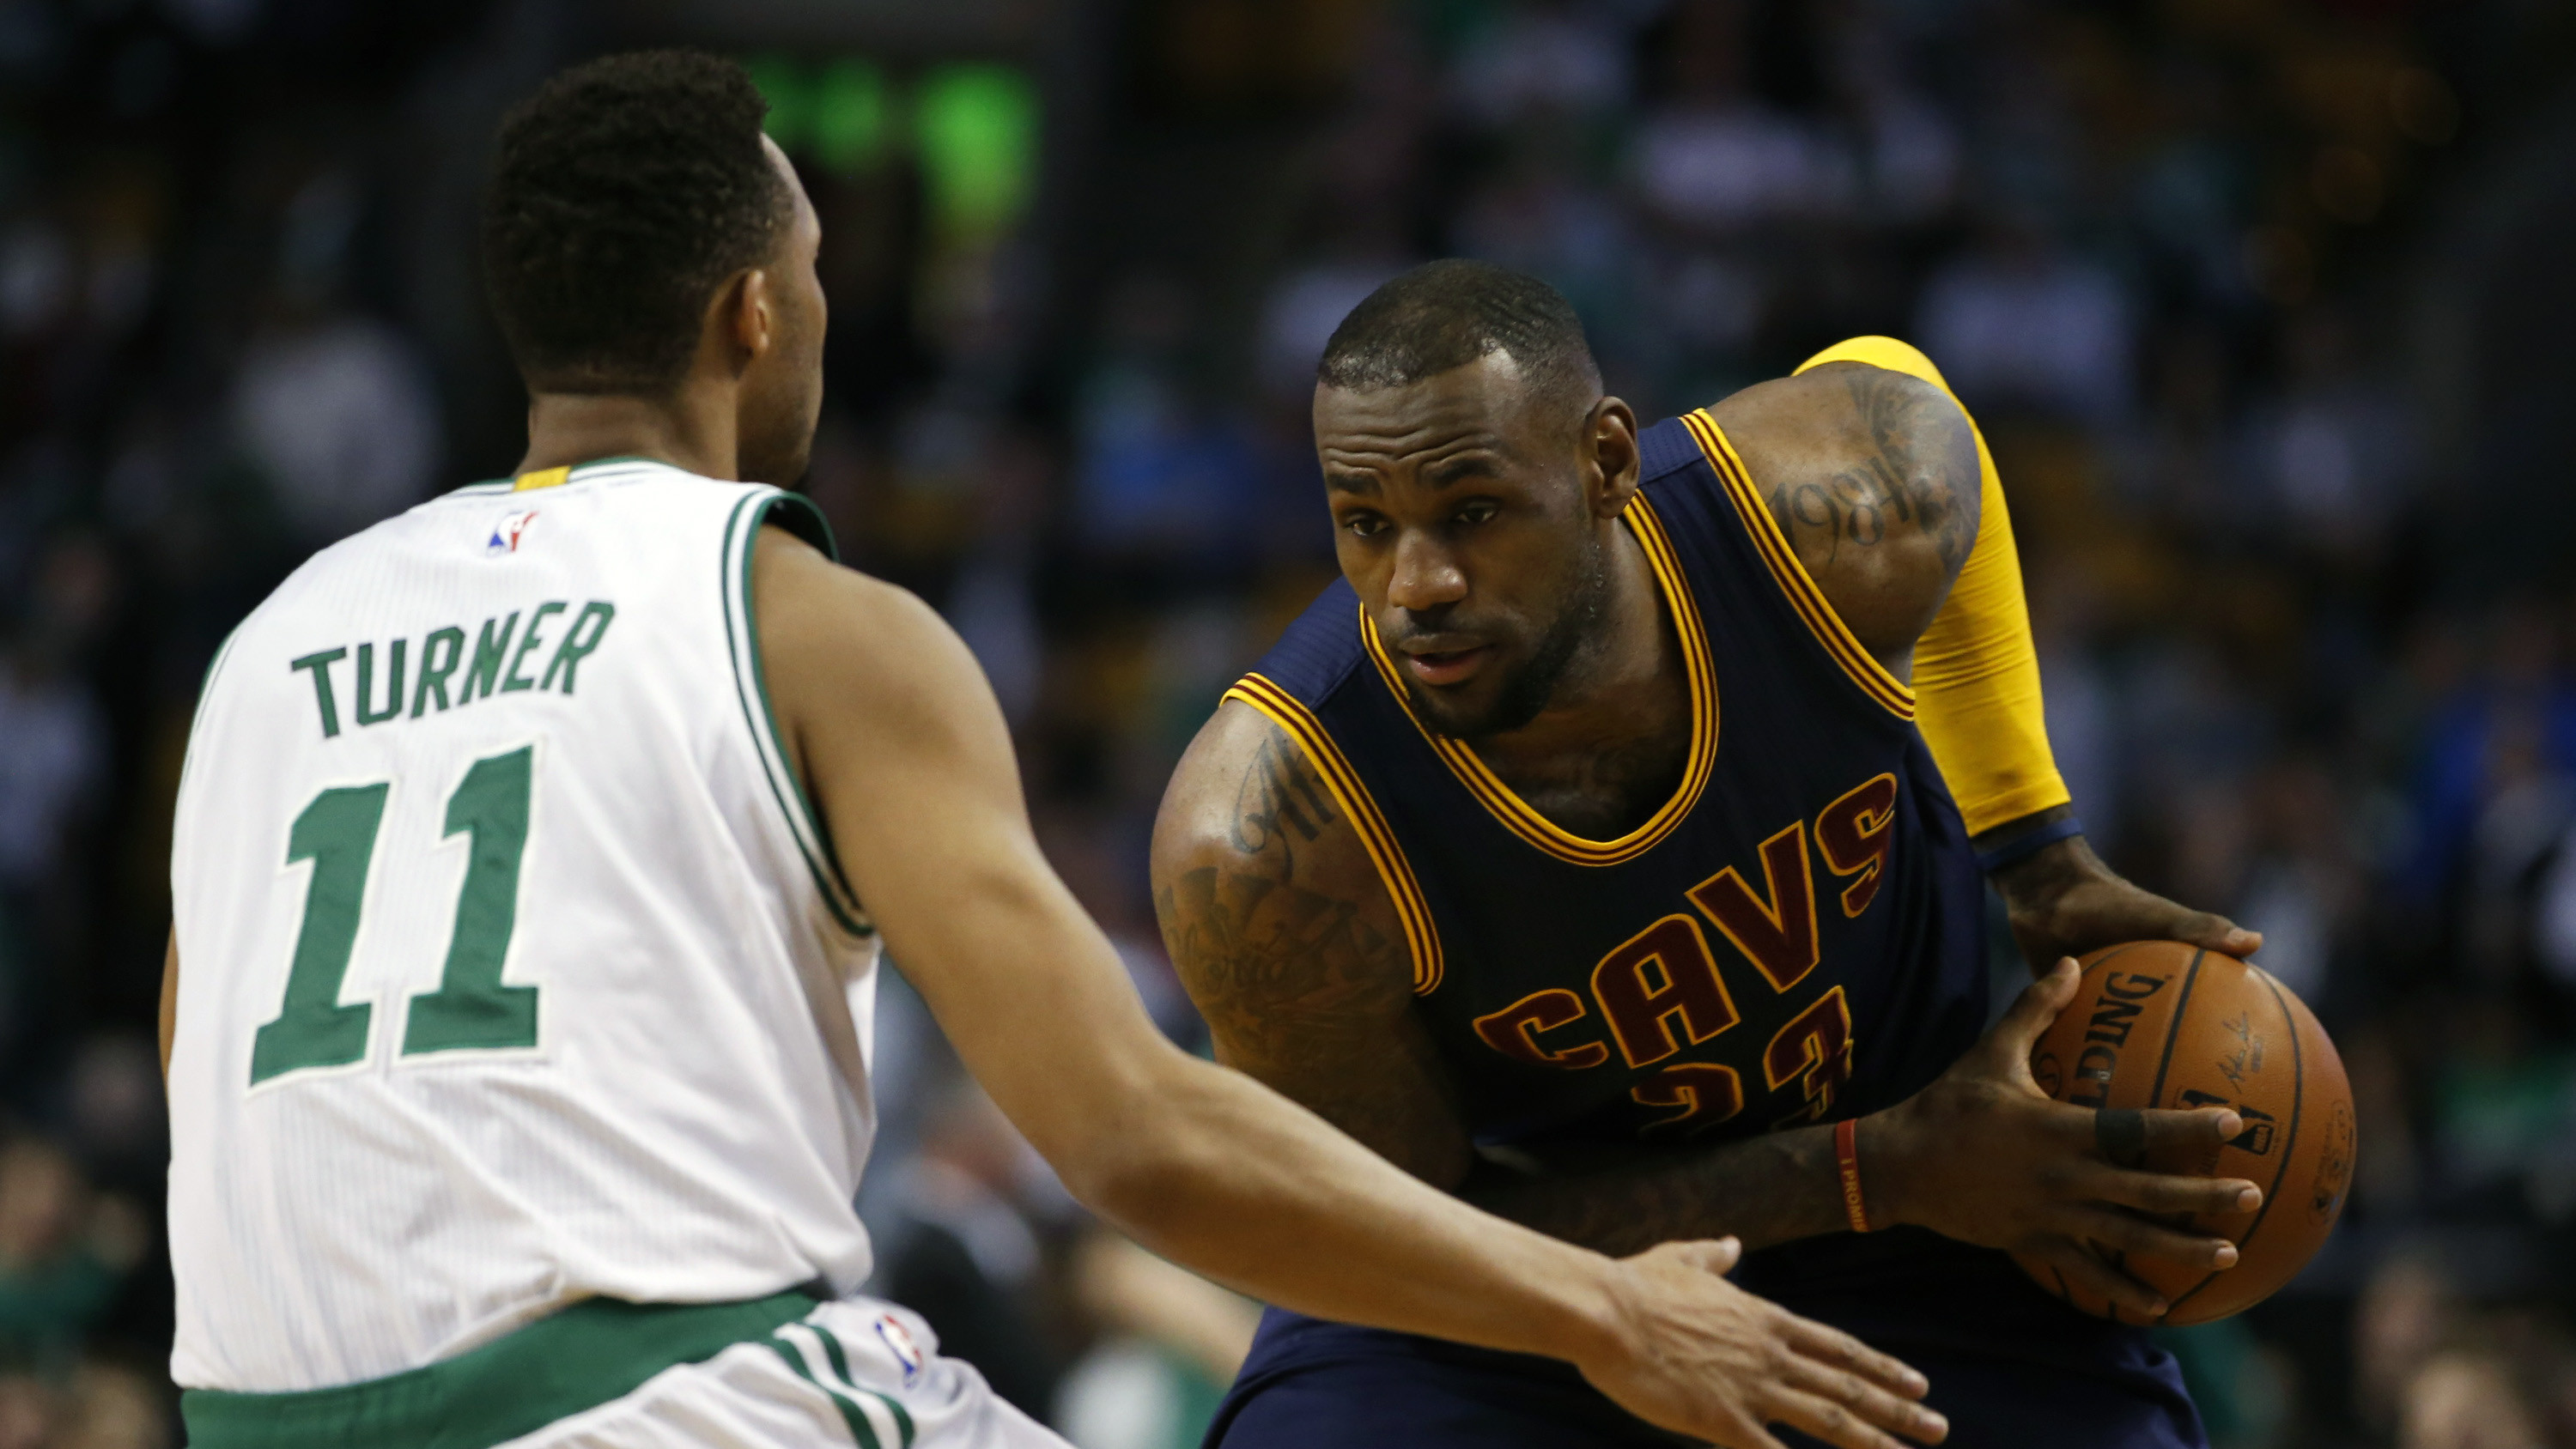 Evan Turner Tweets Jab at LeBron James After New League Awards Are Announced thumbnail